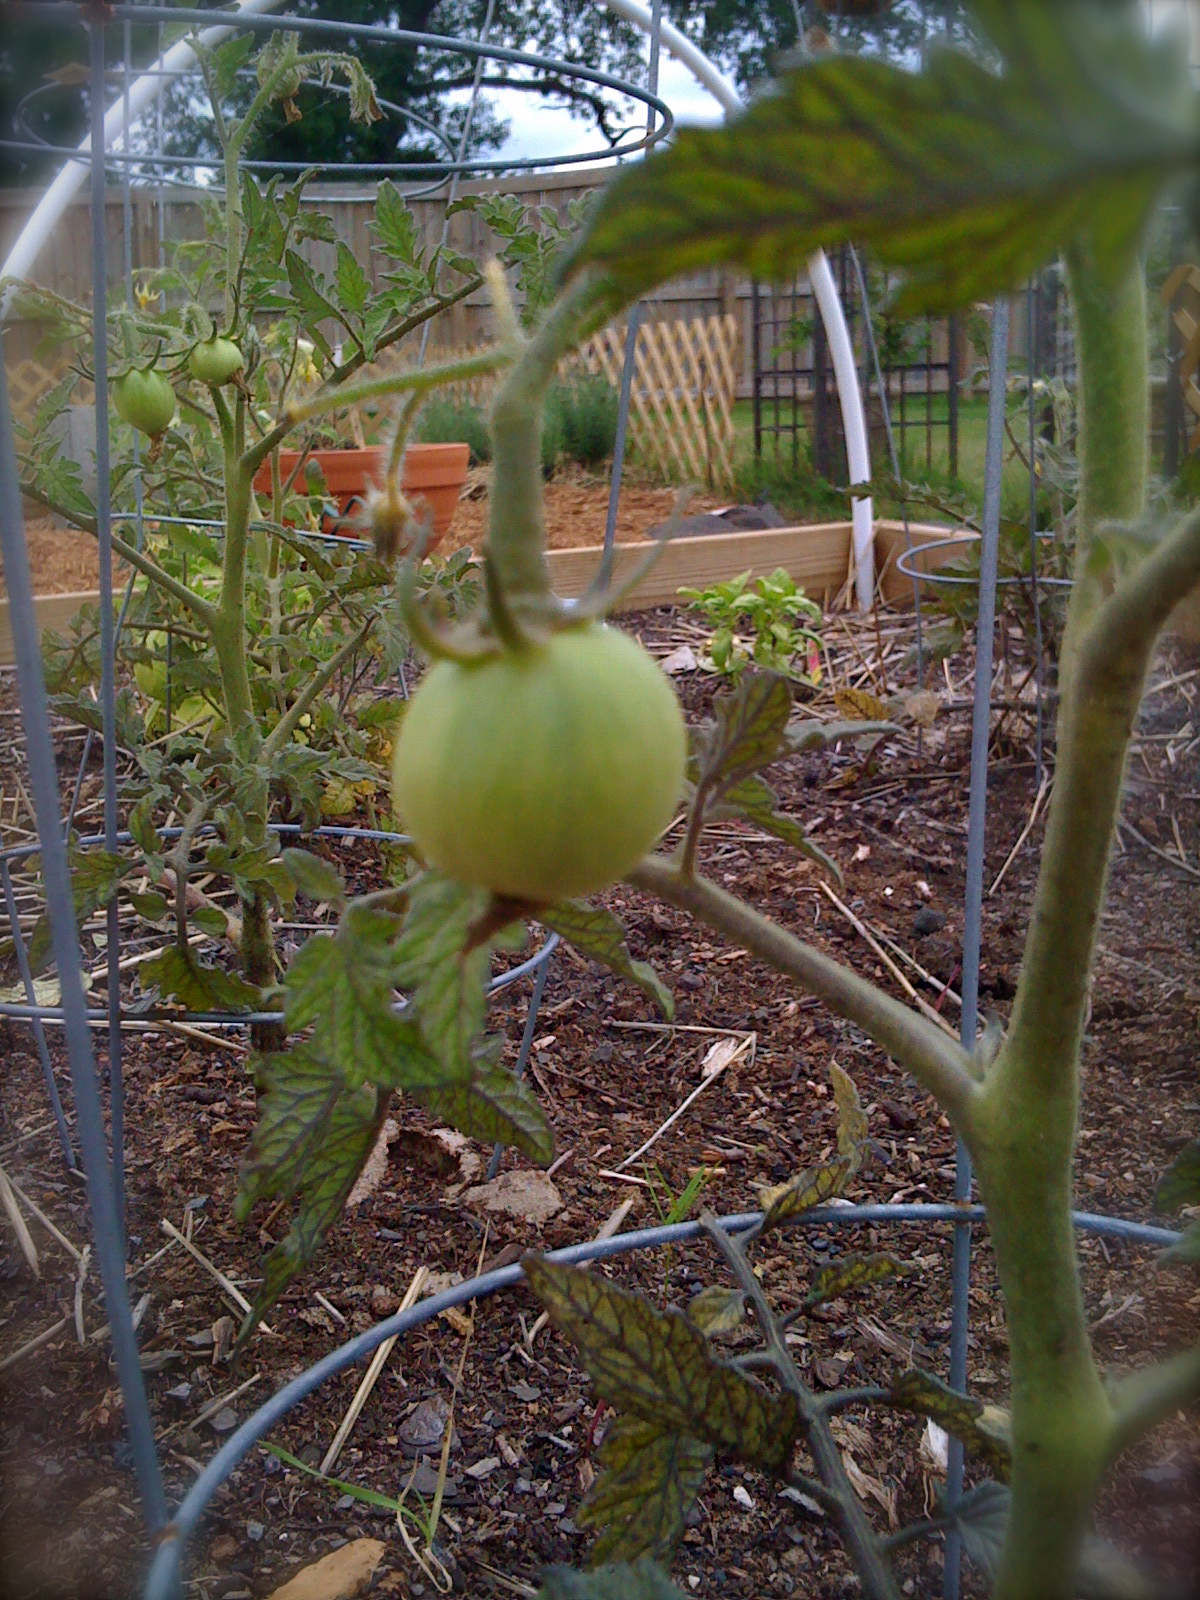 Another Rutgers Baby Tomato